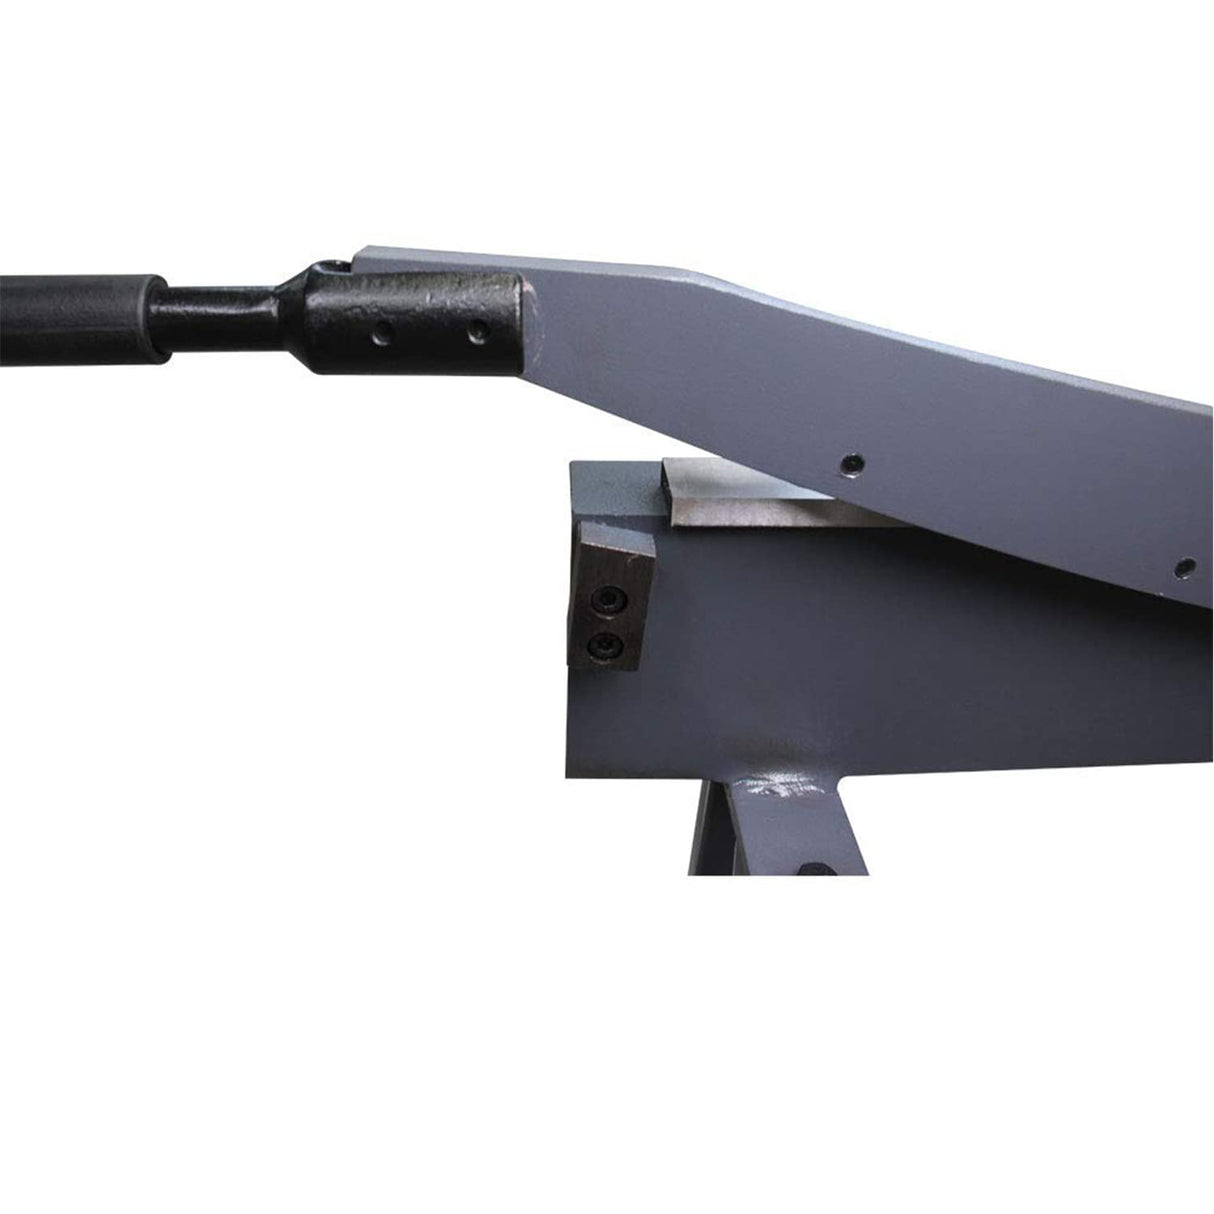 The sheet metal guillotine shear comes with a sturdy stand features a long rubberized handle for maximum leverage. It has a bed length of 52 inch, suitable for cutting metal plate of 16 gauge. The hand shear is with hand control and simple operation Special used for thin plates .Suitable for metal plate and plastic plate